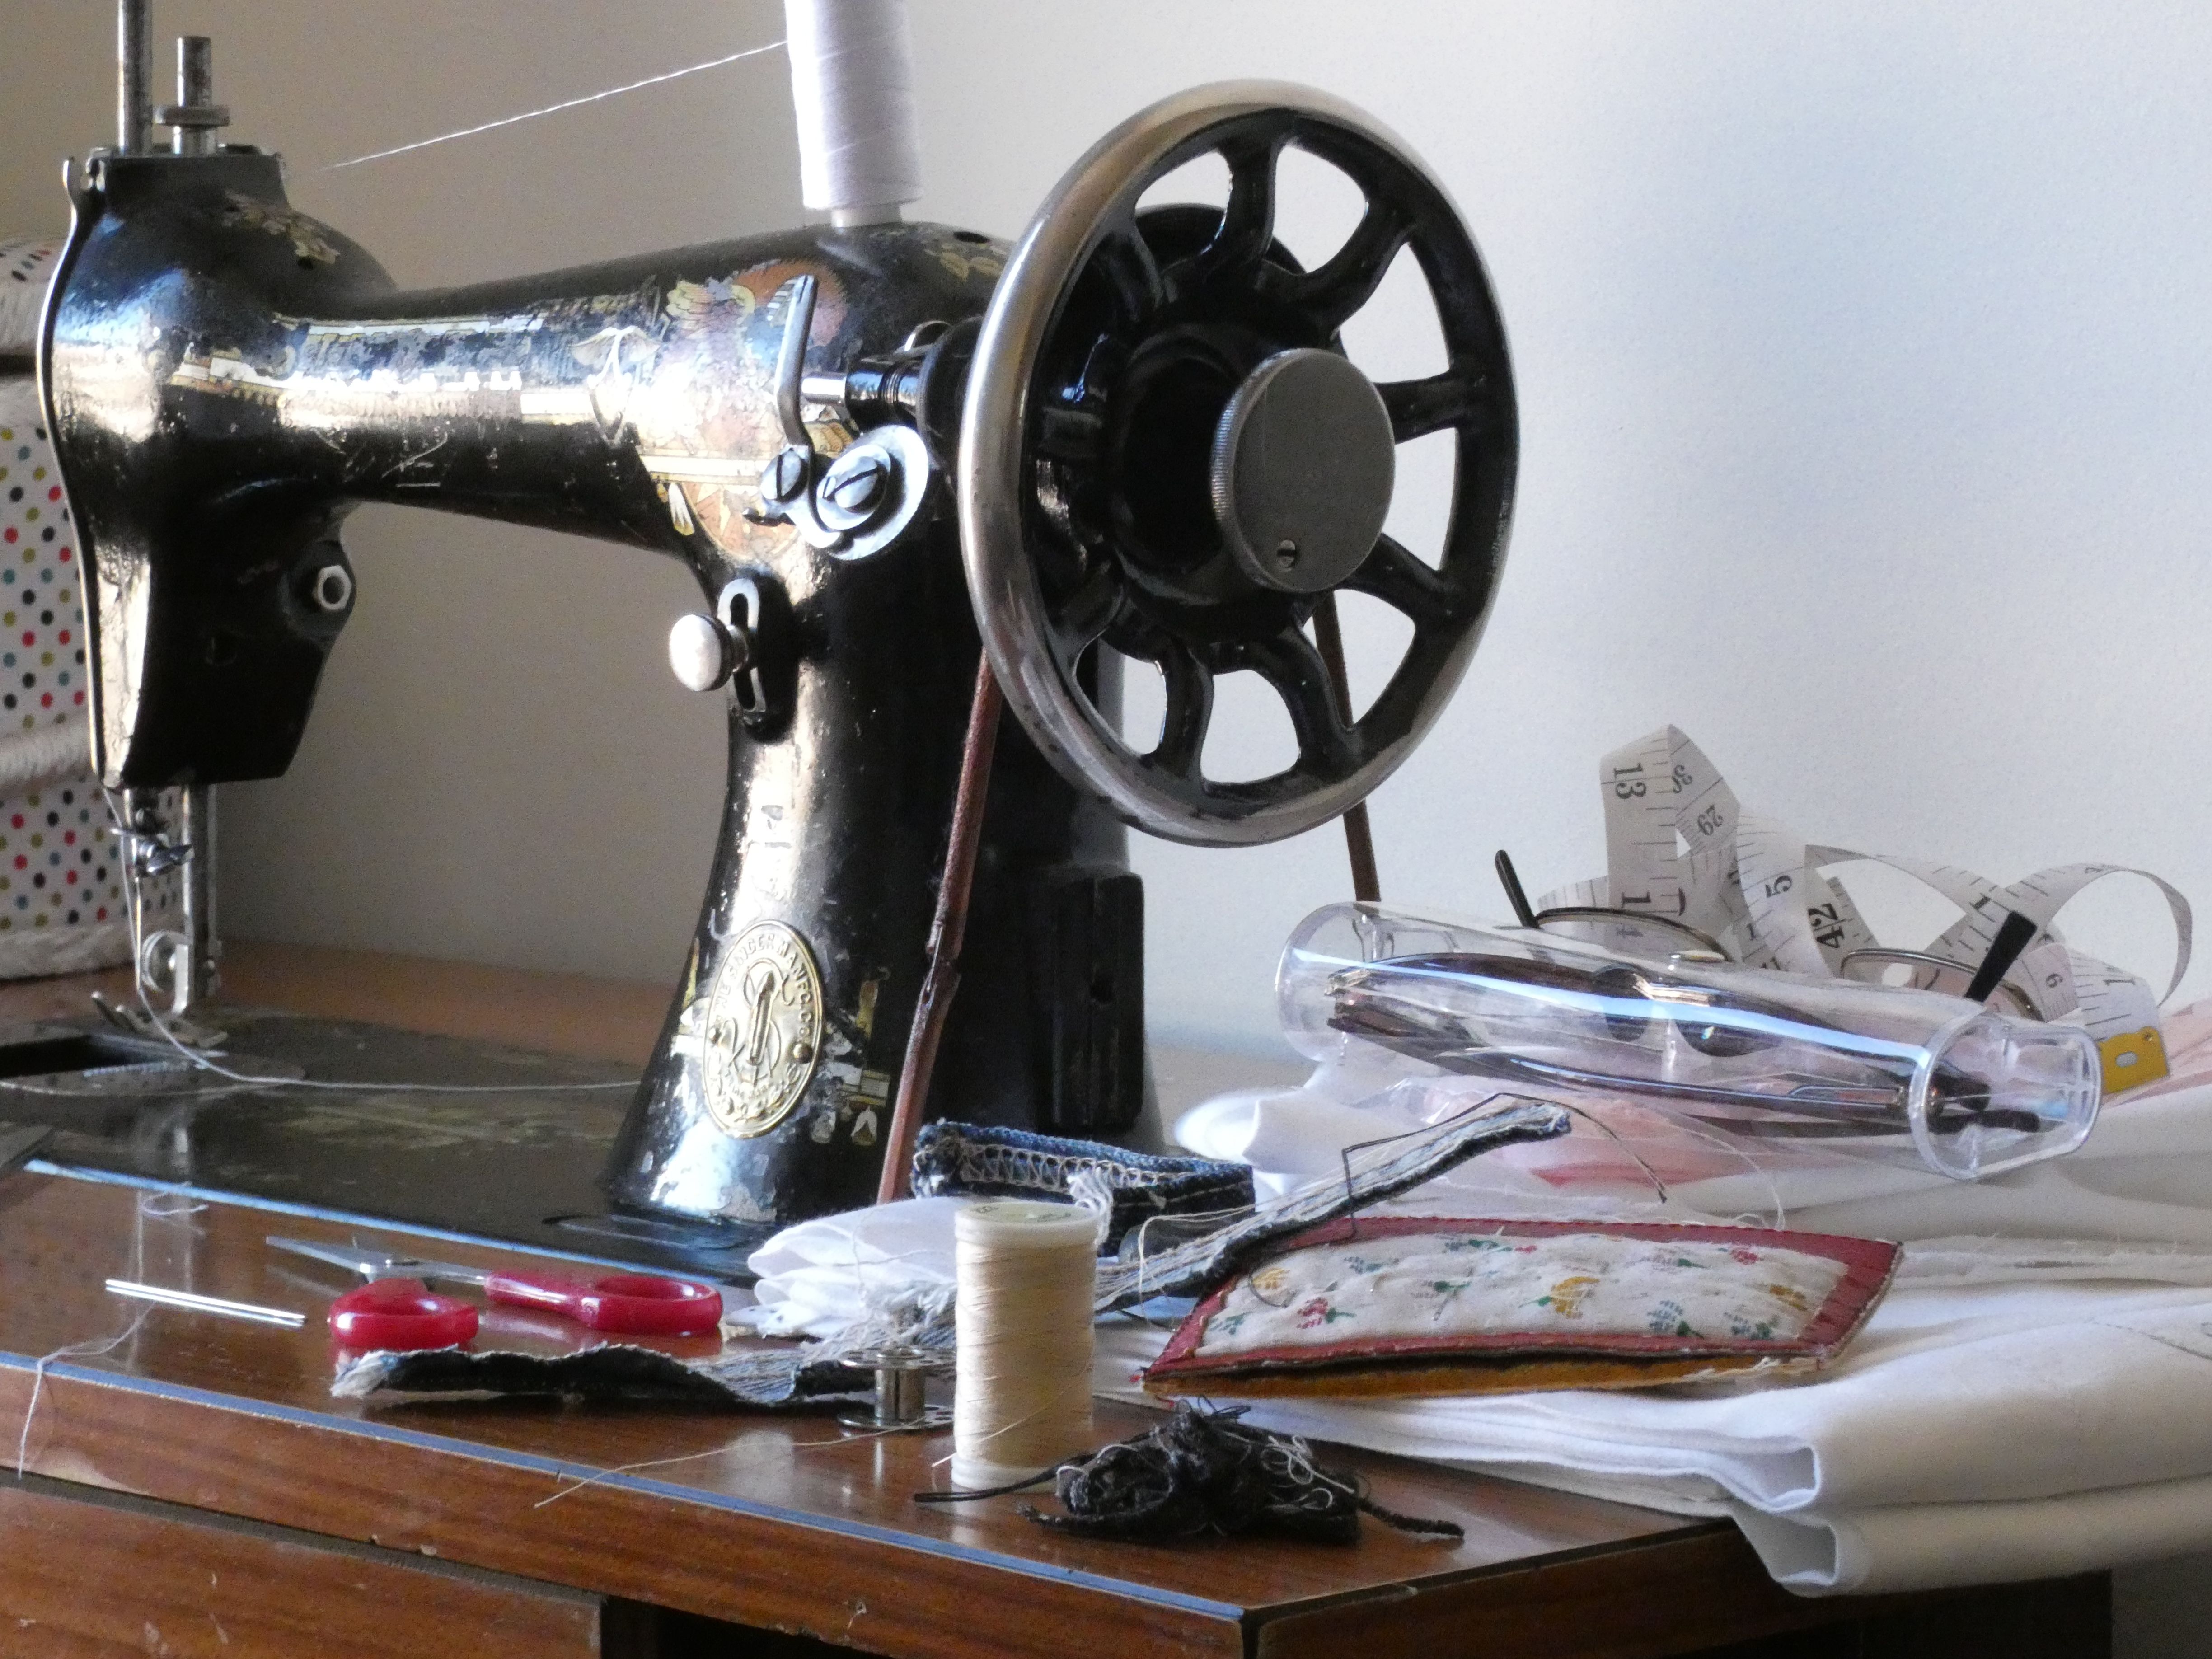 old sewing machine with other sewing tools next to it